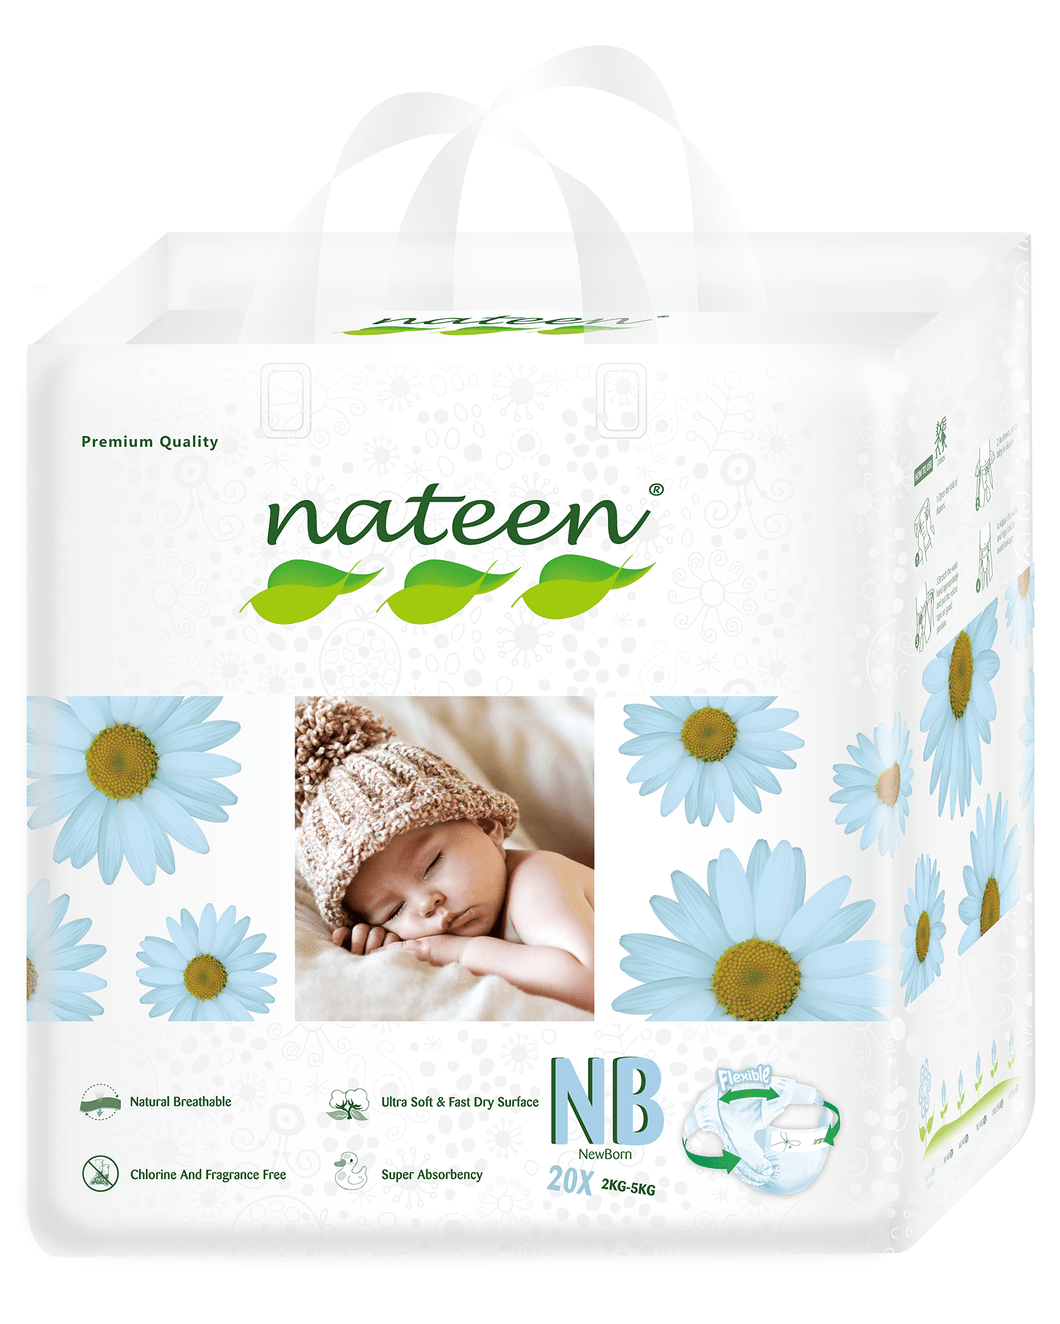 Free Samples - Nateen Canada - Baby Diapers - babywipes nateen canada premium diapers biodegradable sustainable ecoliving ecofriendly toronto vancouver extremely soft co